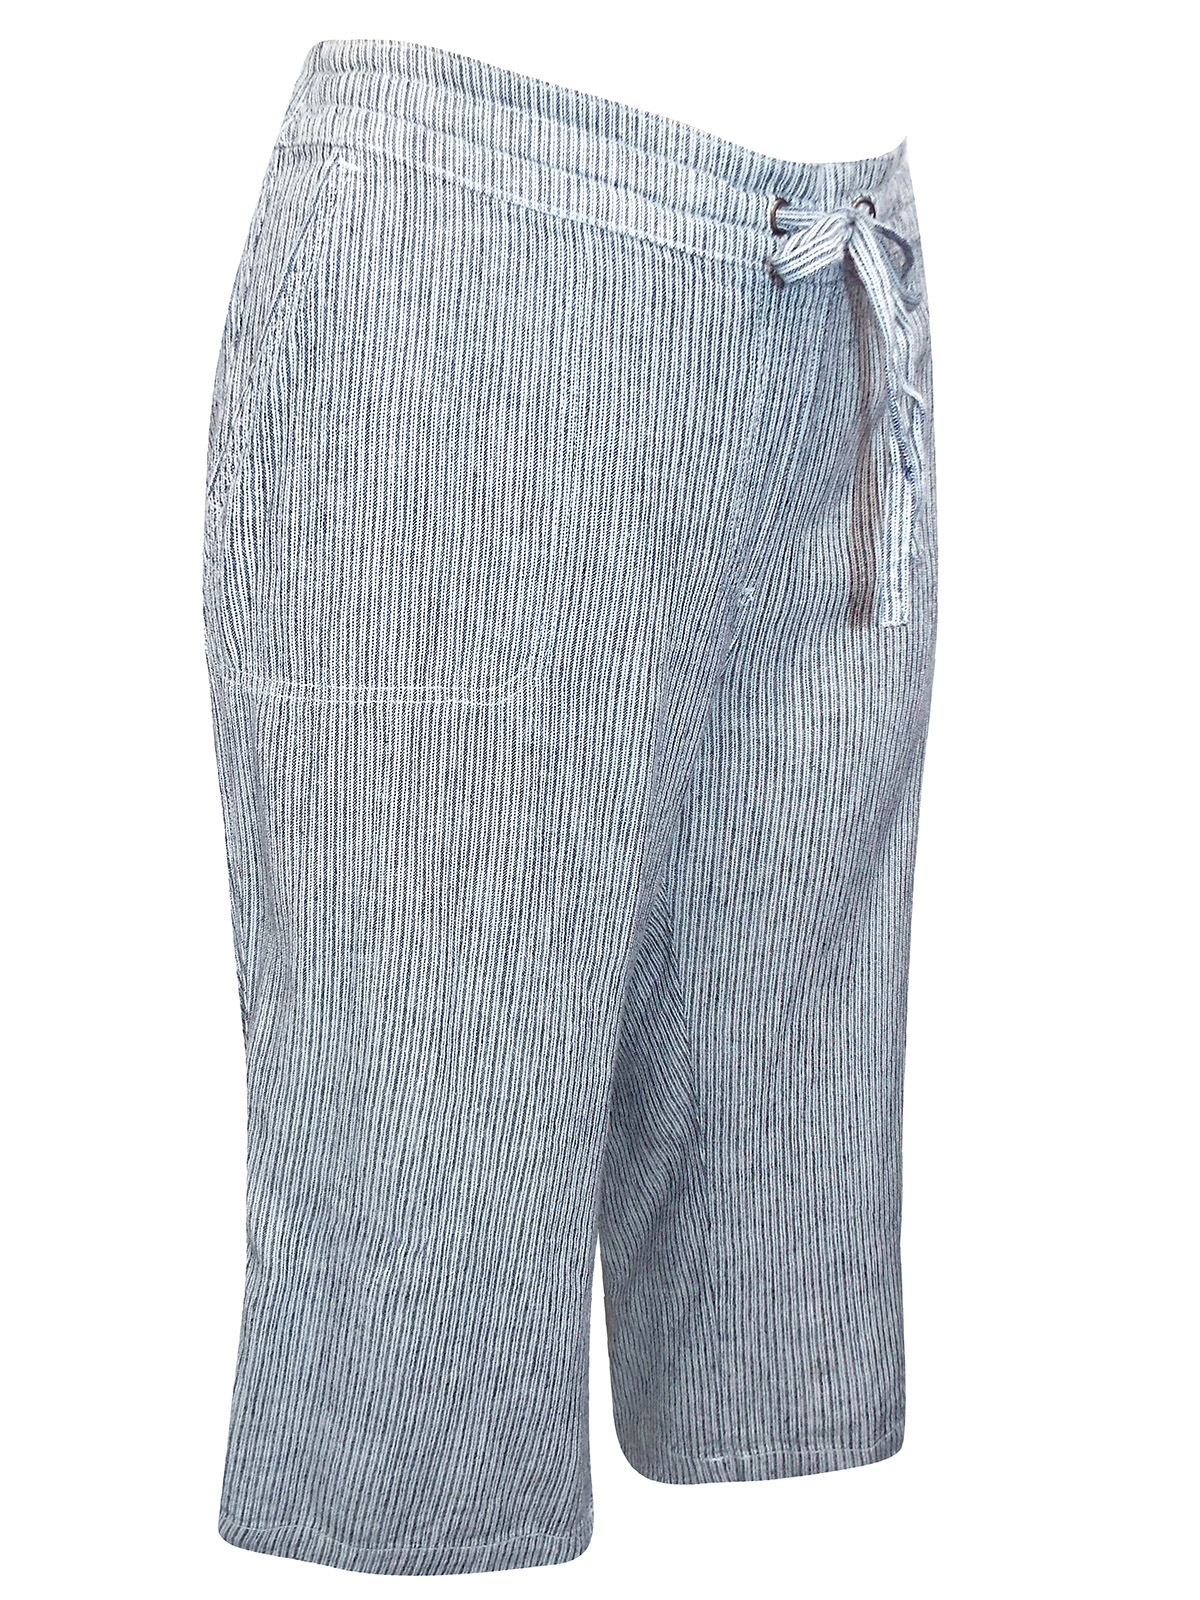 Marks and Spencer - - M&5 NAVY Linen Blend Striped Cropped Trousers